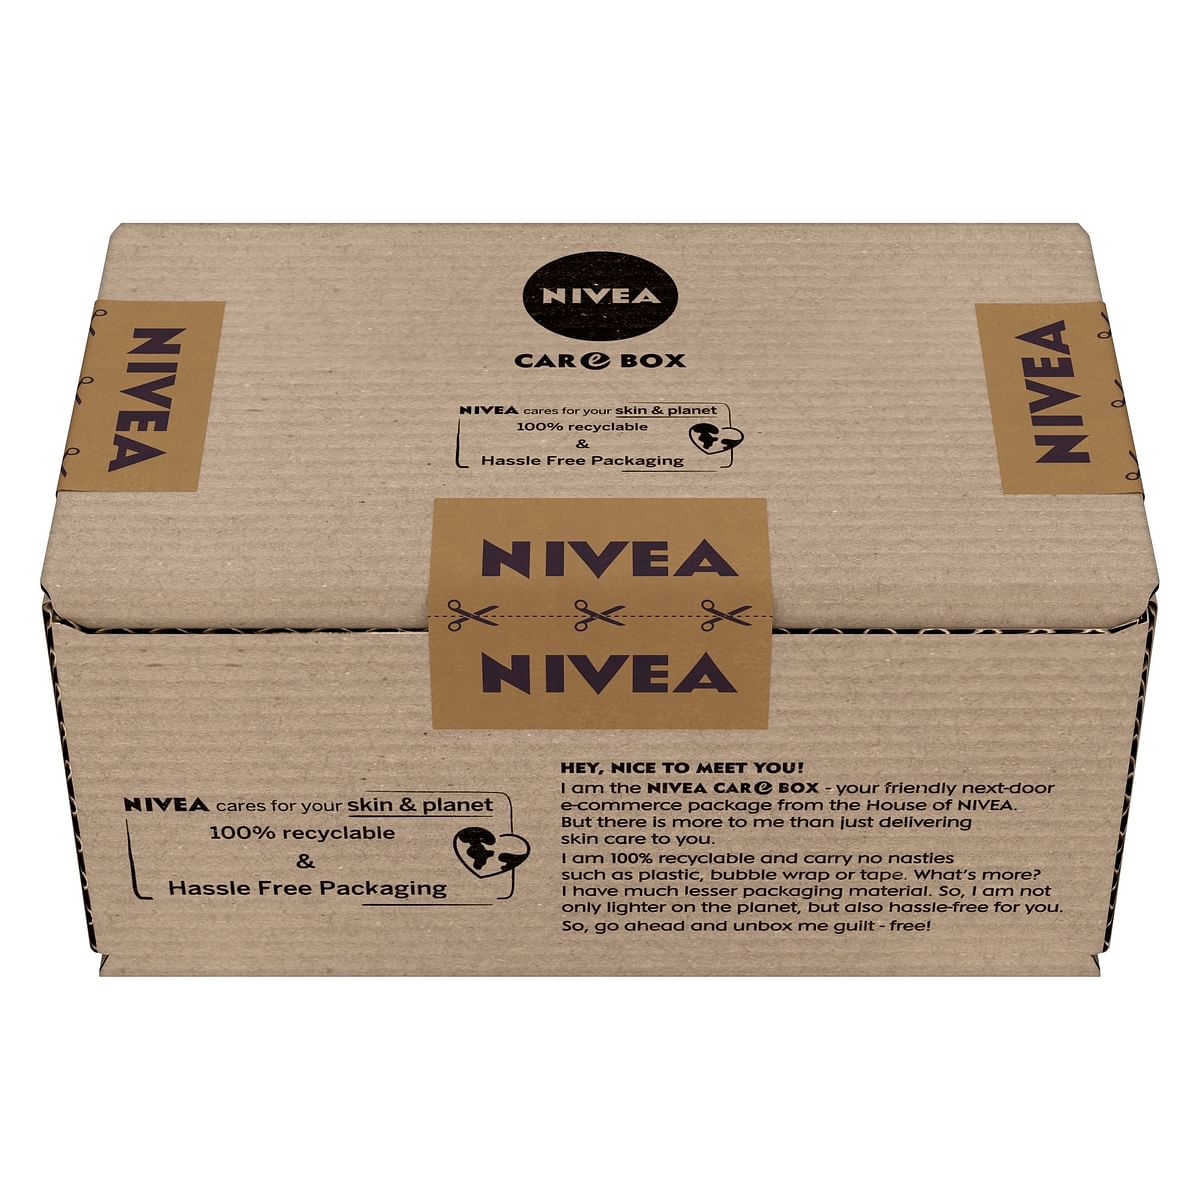 Nivea introduces e-commerce care box with sustainable packaging